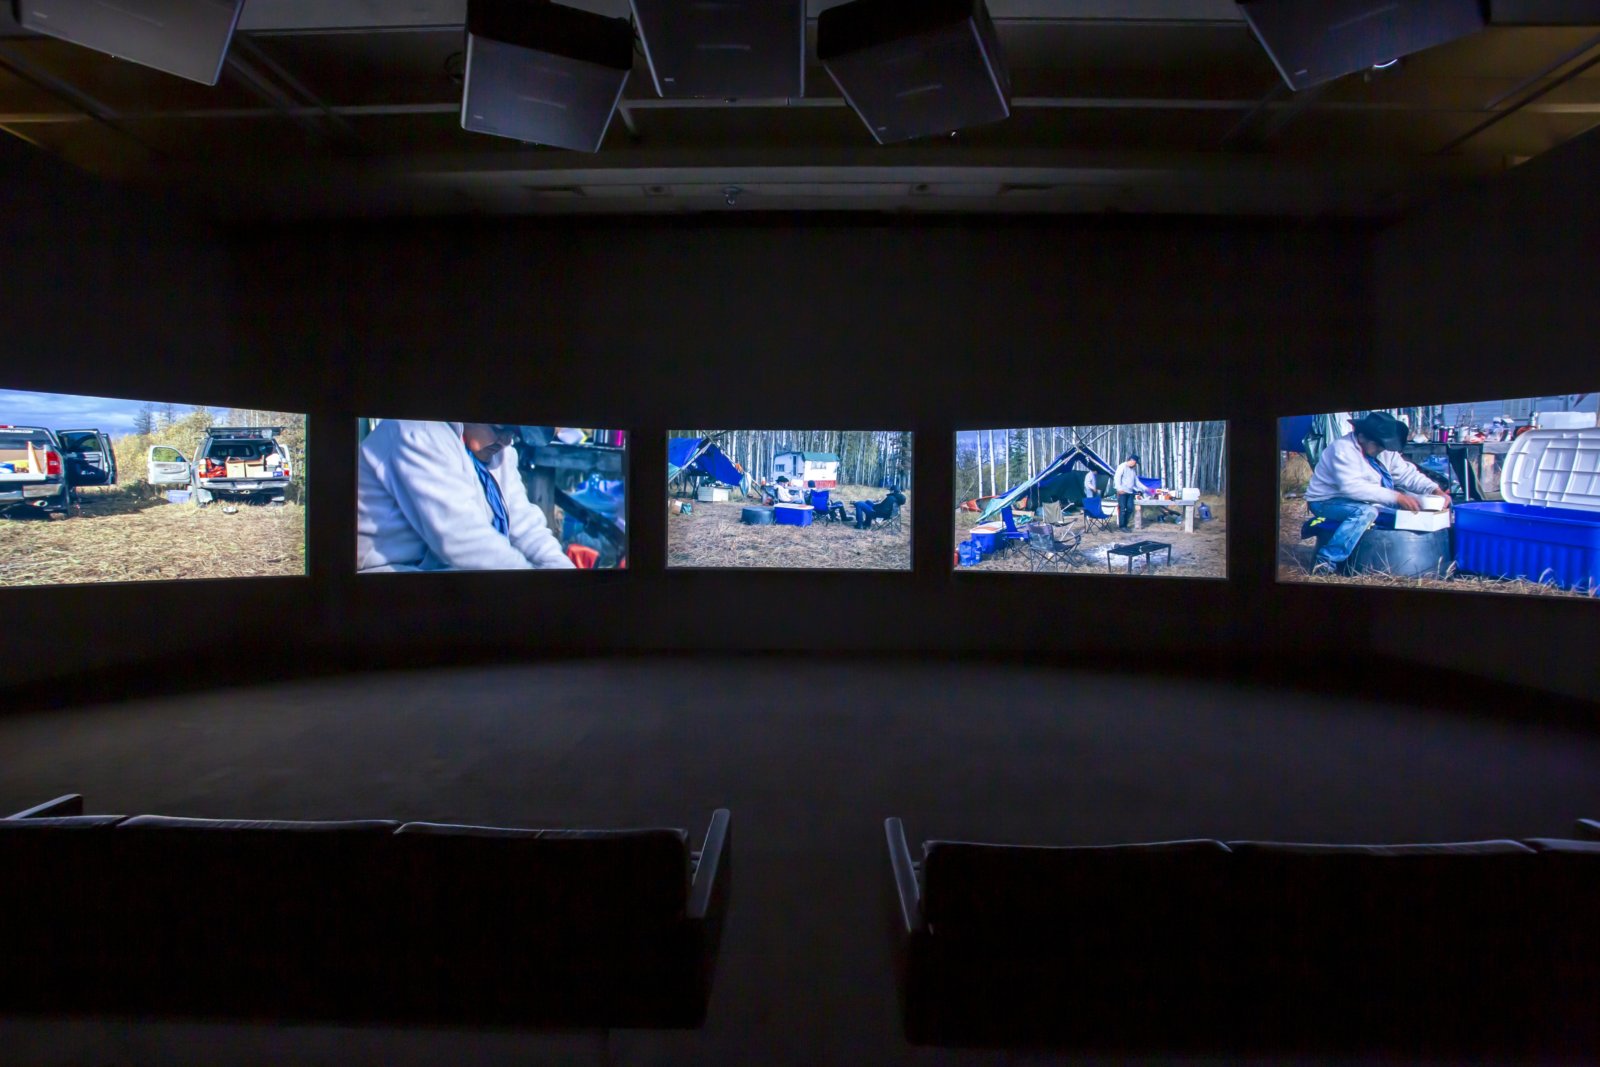 Brian Jungen and Duane Linklater, Modest Livelihood (Director’s Cut), 2019, 5 channel video, colour, silent, 46 minutes, 34 seconds. Installation view, Friendship Centre, Art Gallery of Ontario, Toronto, Canada, 2019